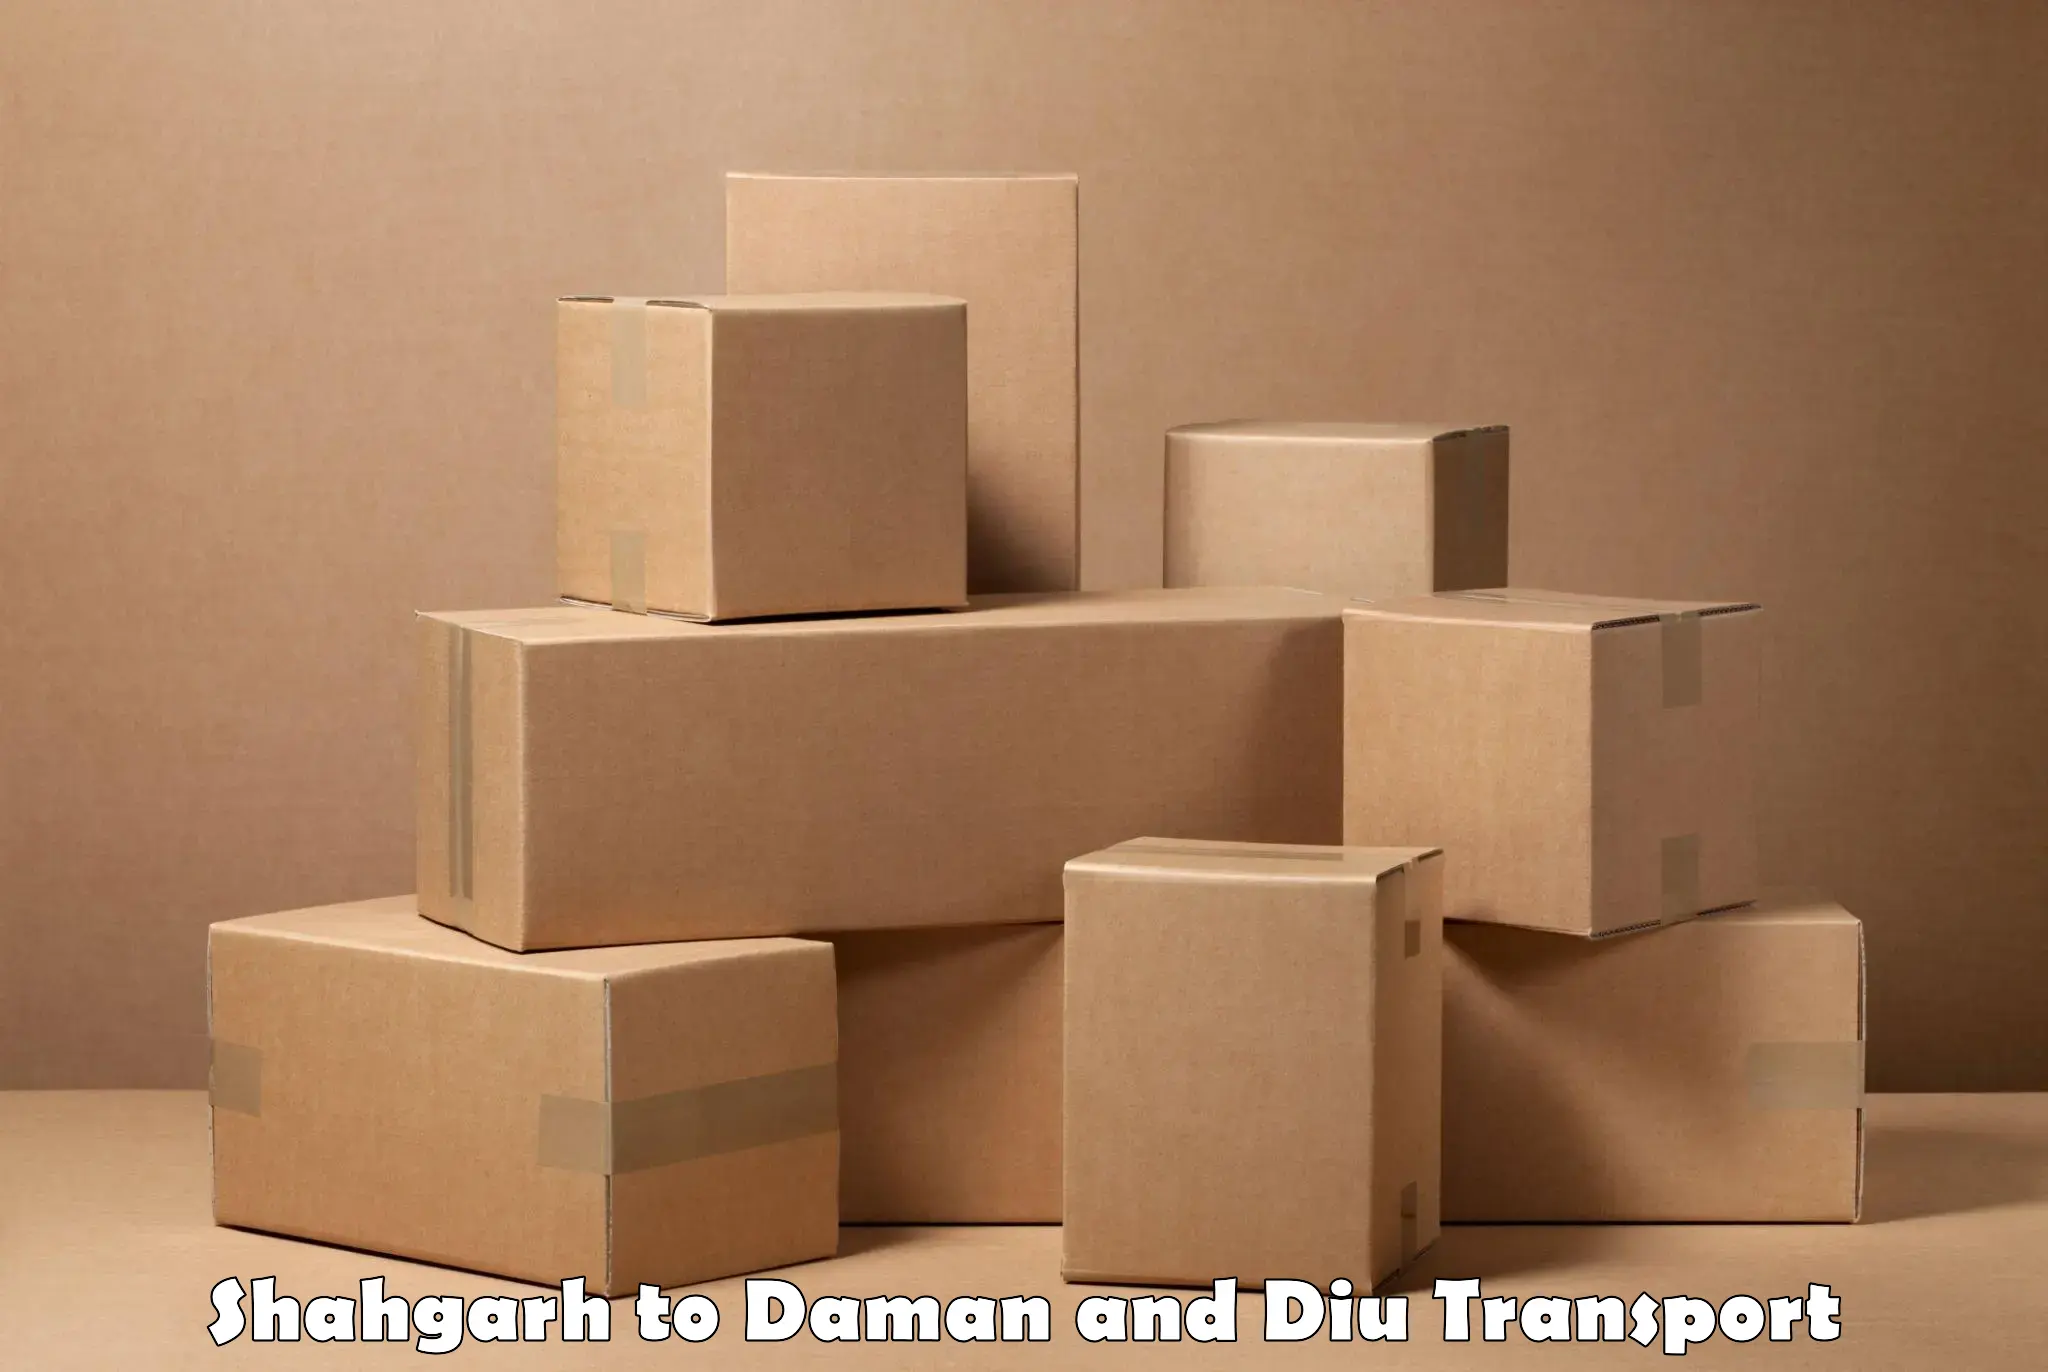 Commercial transport service Shahgarh to Daman and Diu